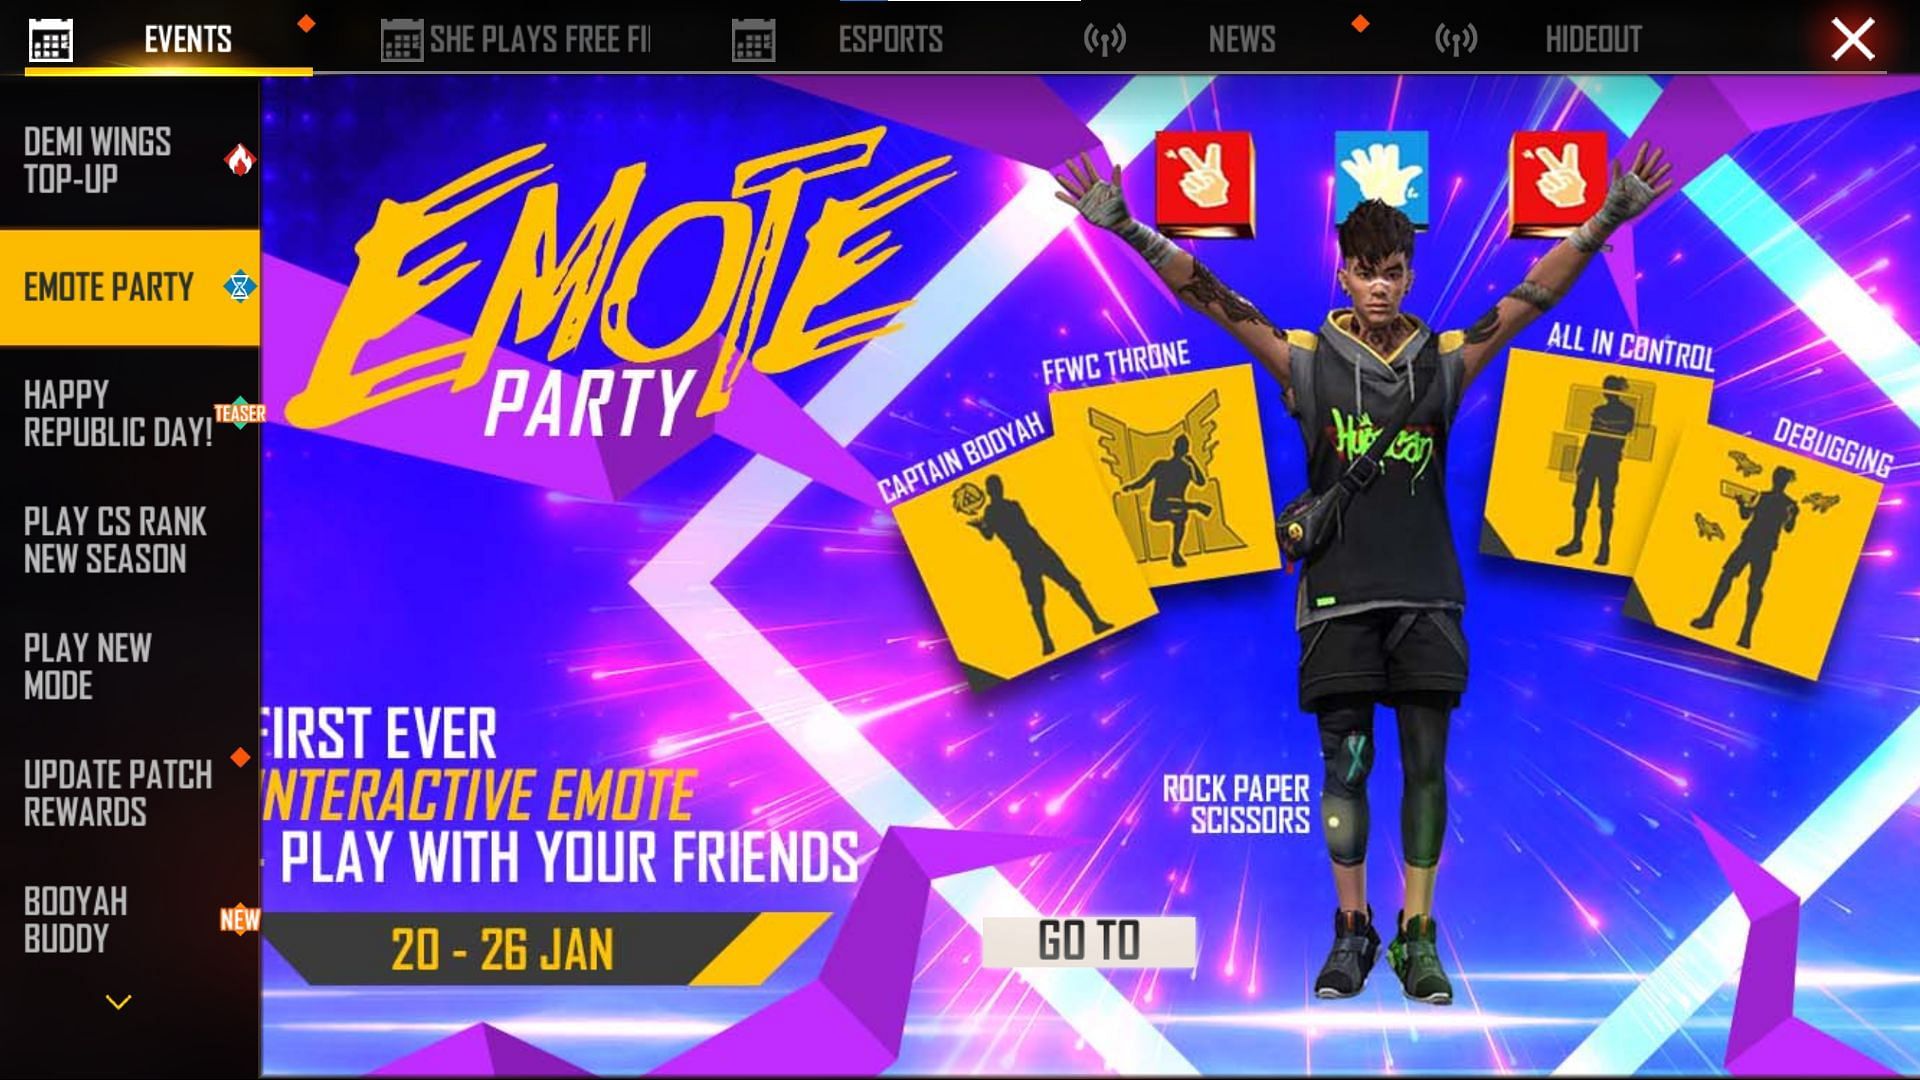 Click on the &lsquo;Go To&rsquo; button to visit the event (Image via Free Fire)